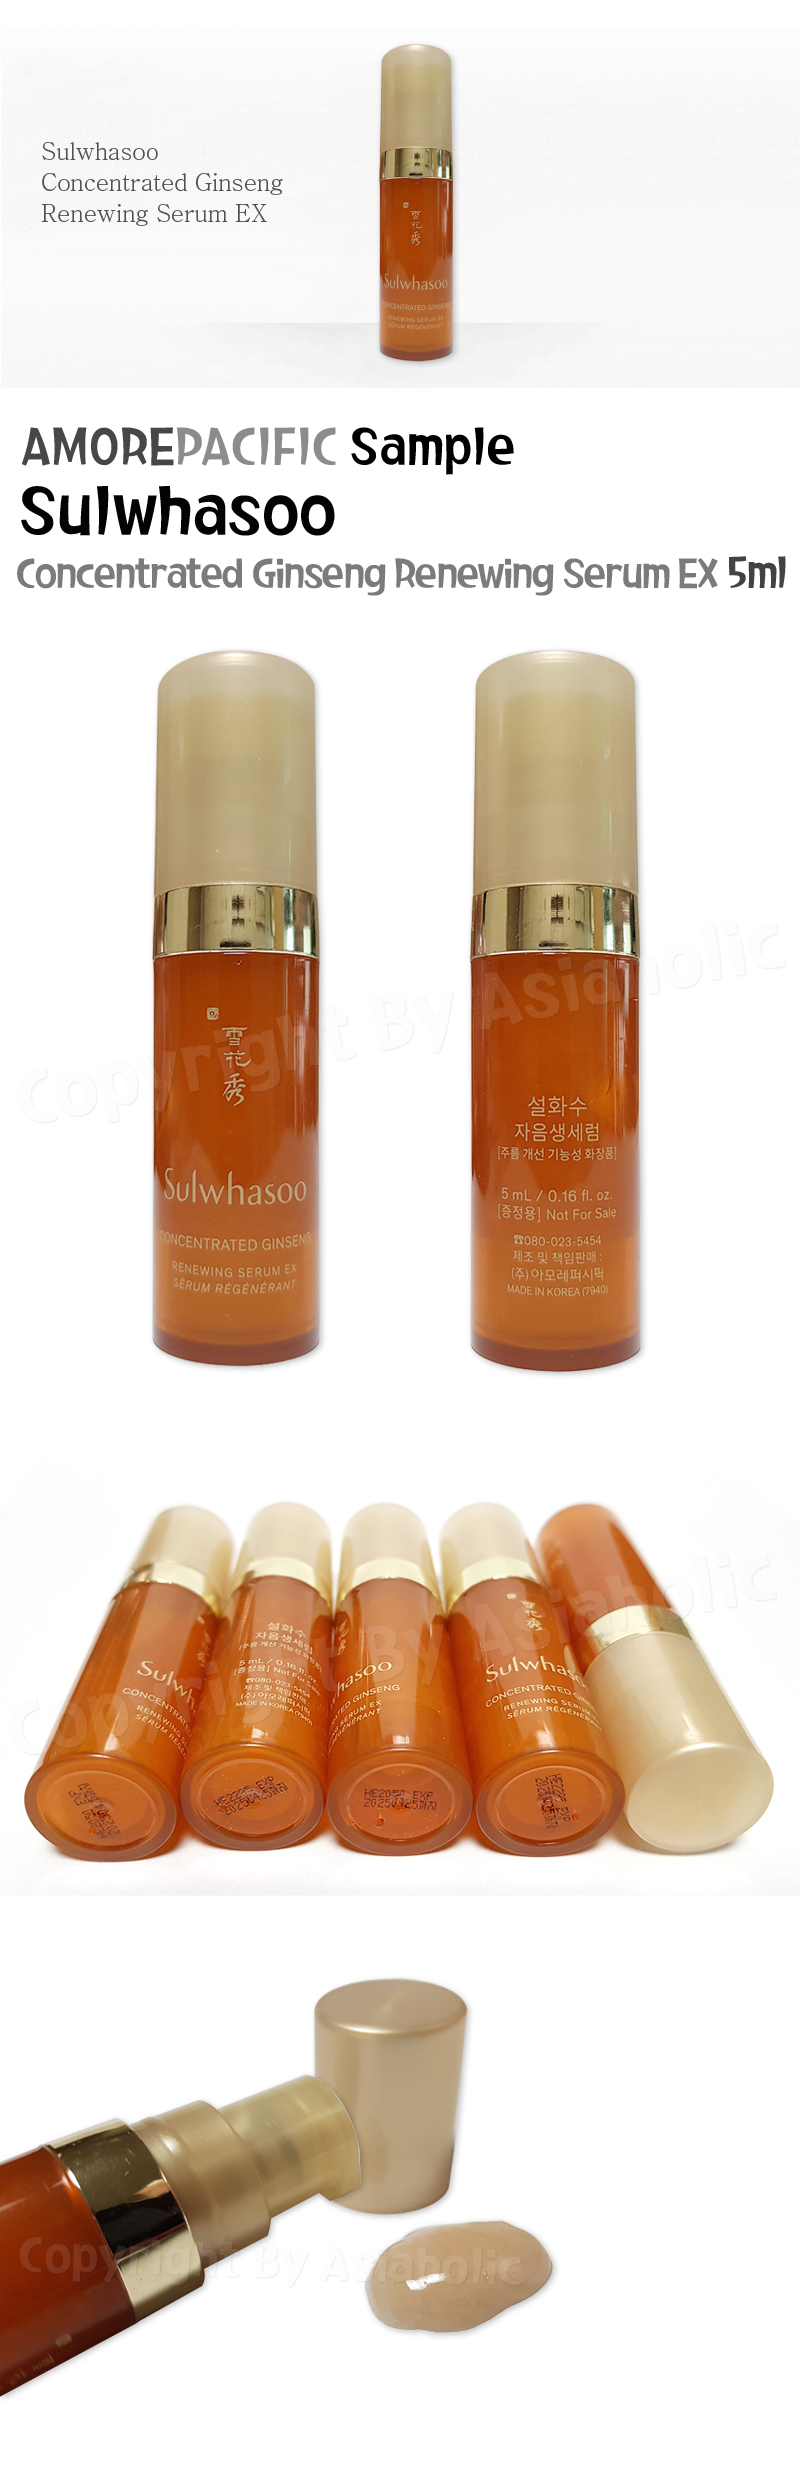 Sulwhasoo Concentrated Ginseng Renewing Serum EX 5ml x 3pcs (15ml) Newest Version